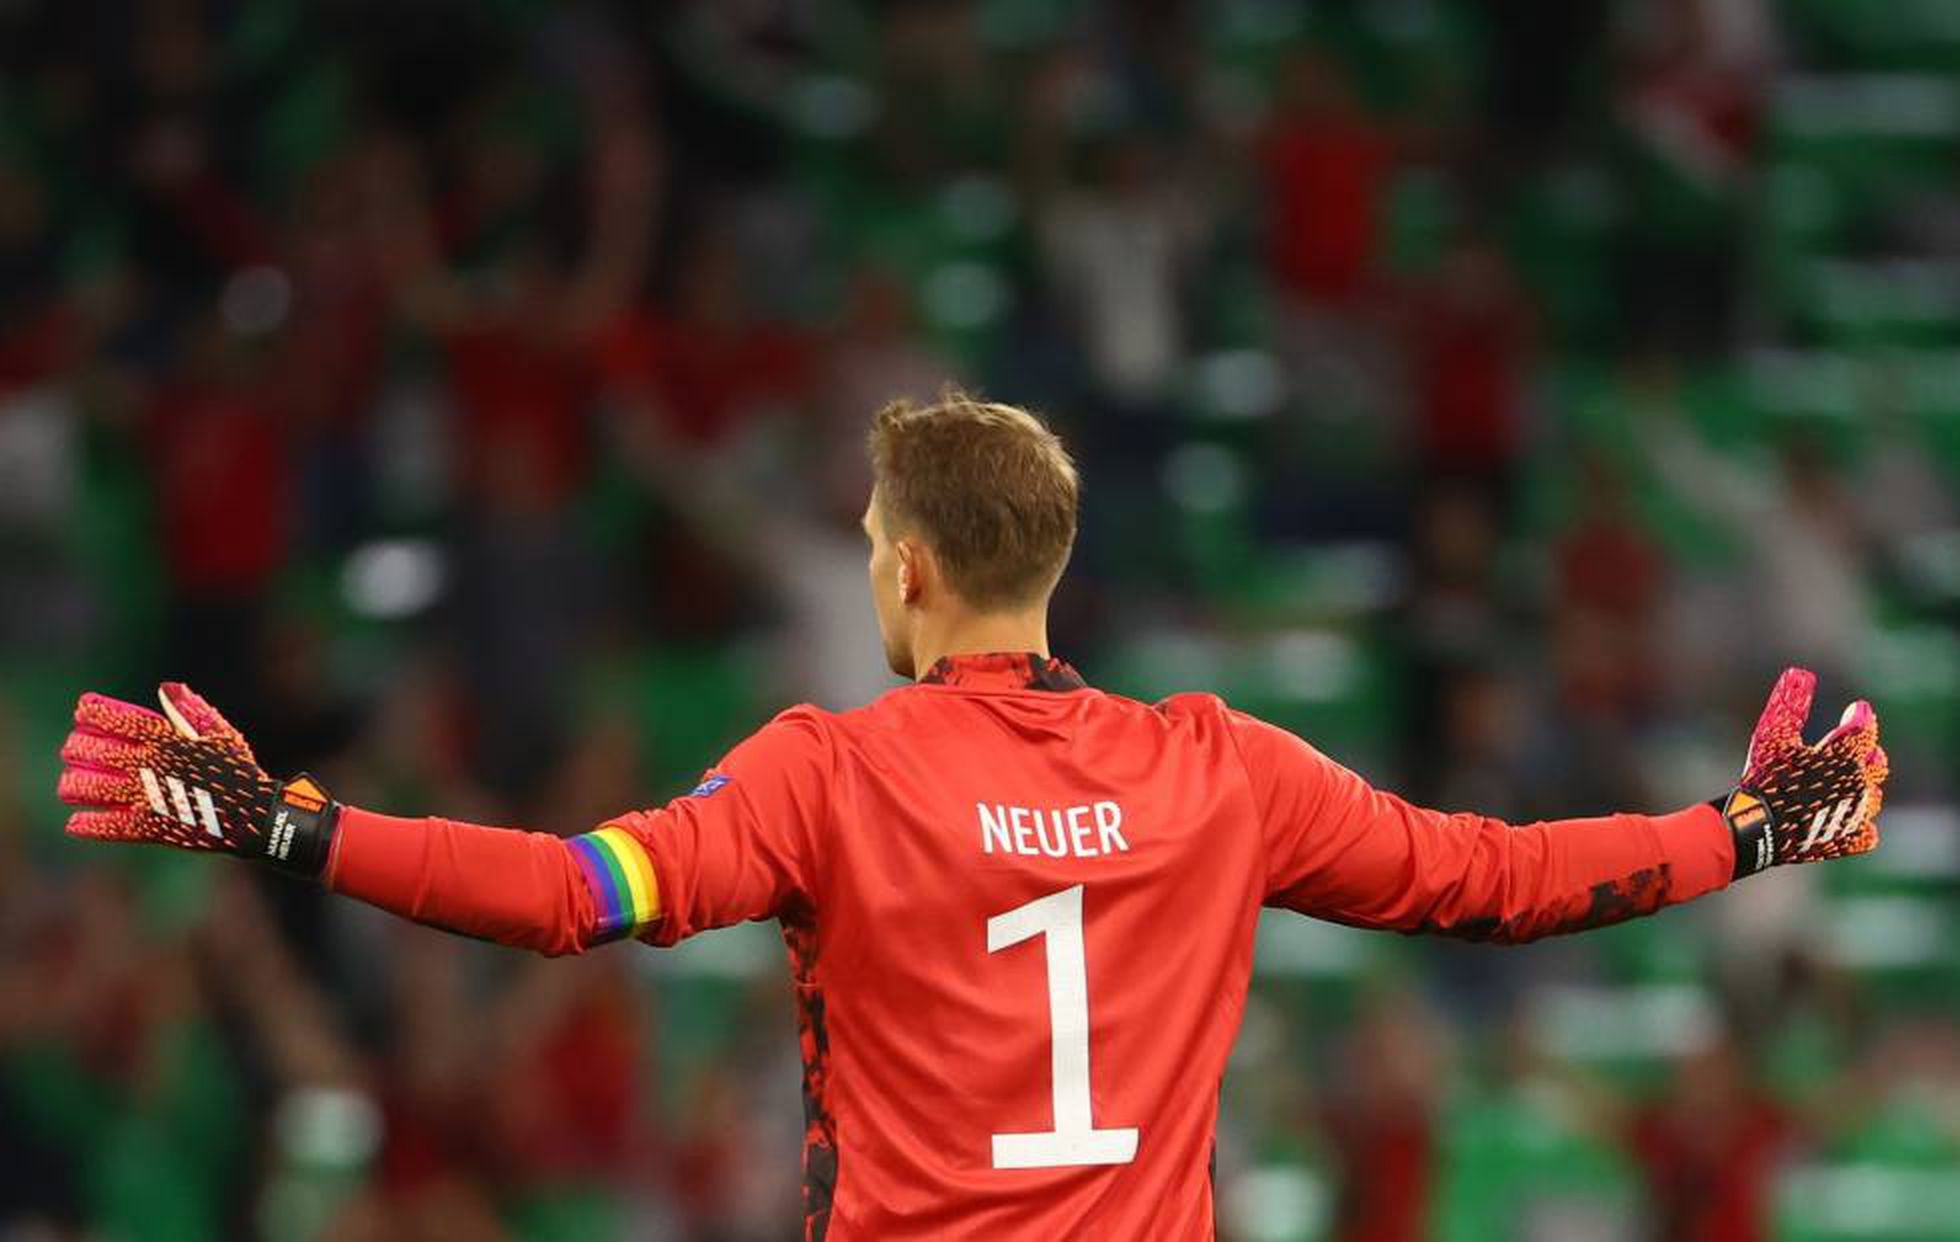 Gay is neuer 2020 is